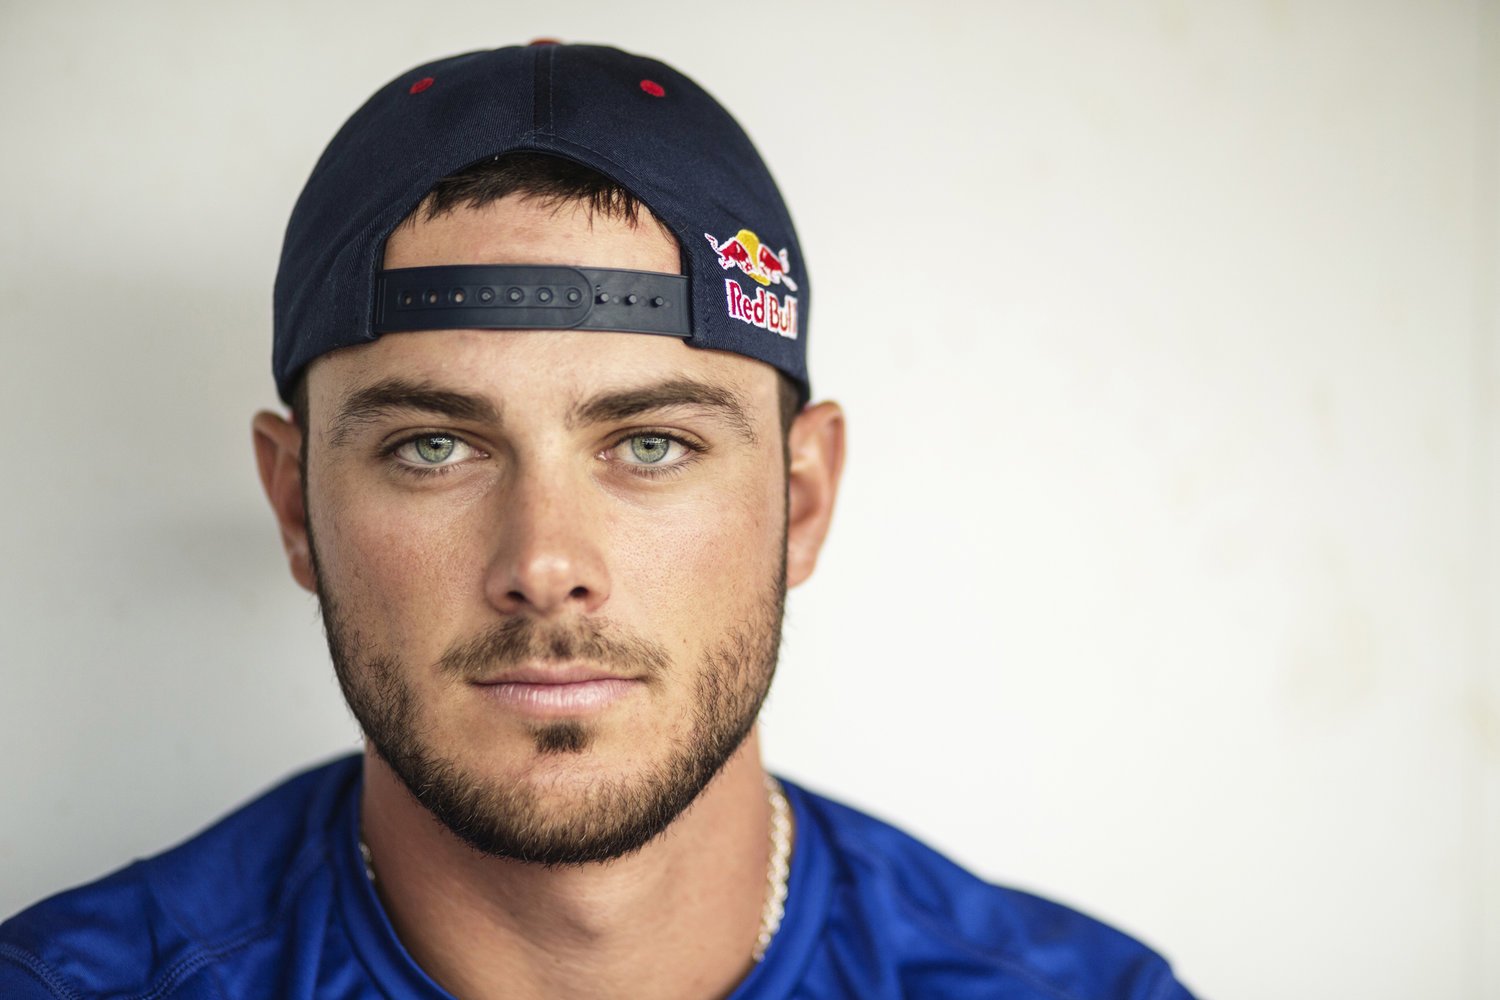 The Cubs Top List You've Been Waiting For: Your 9 Hottest Cubs